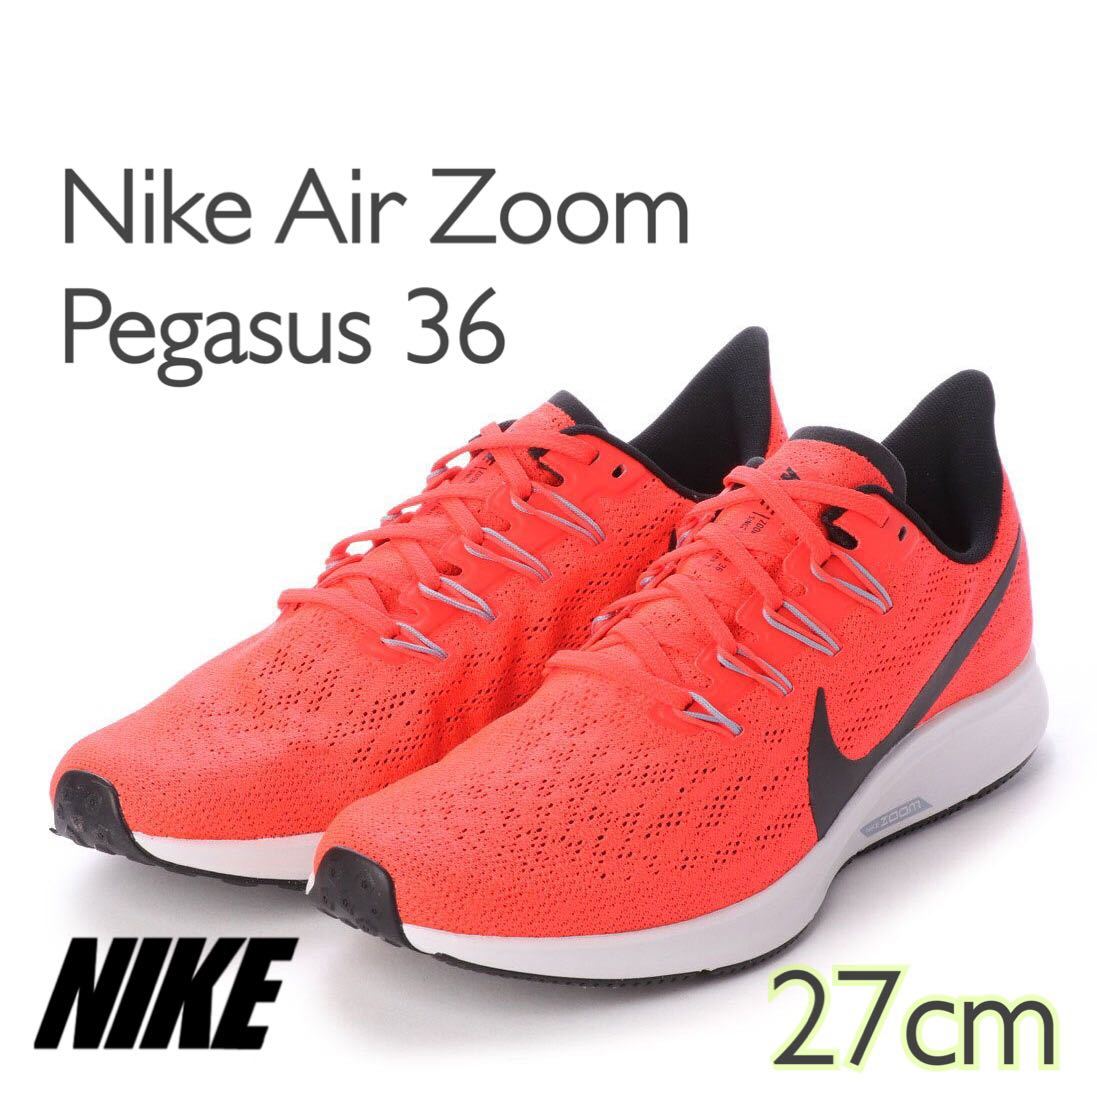 Nike Air Zoom Pegasus 36 Nike air zoom Pegasus 36 (AQ2203-600) orange 27cm box equipped 